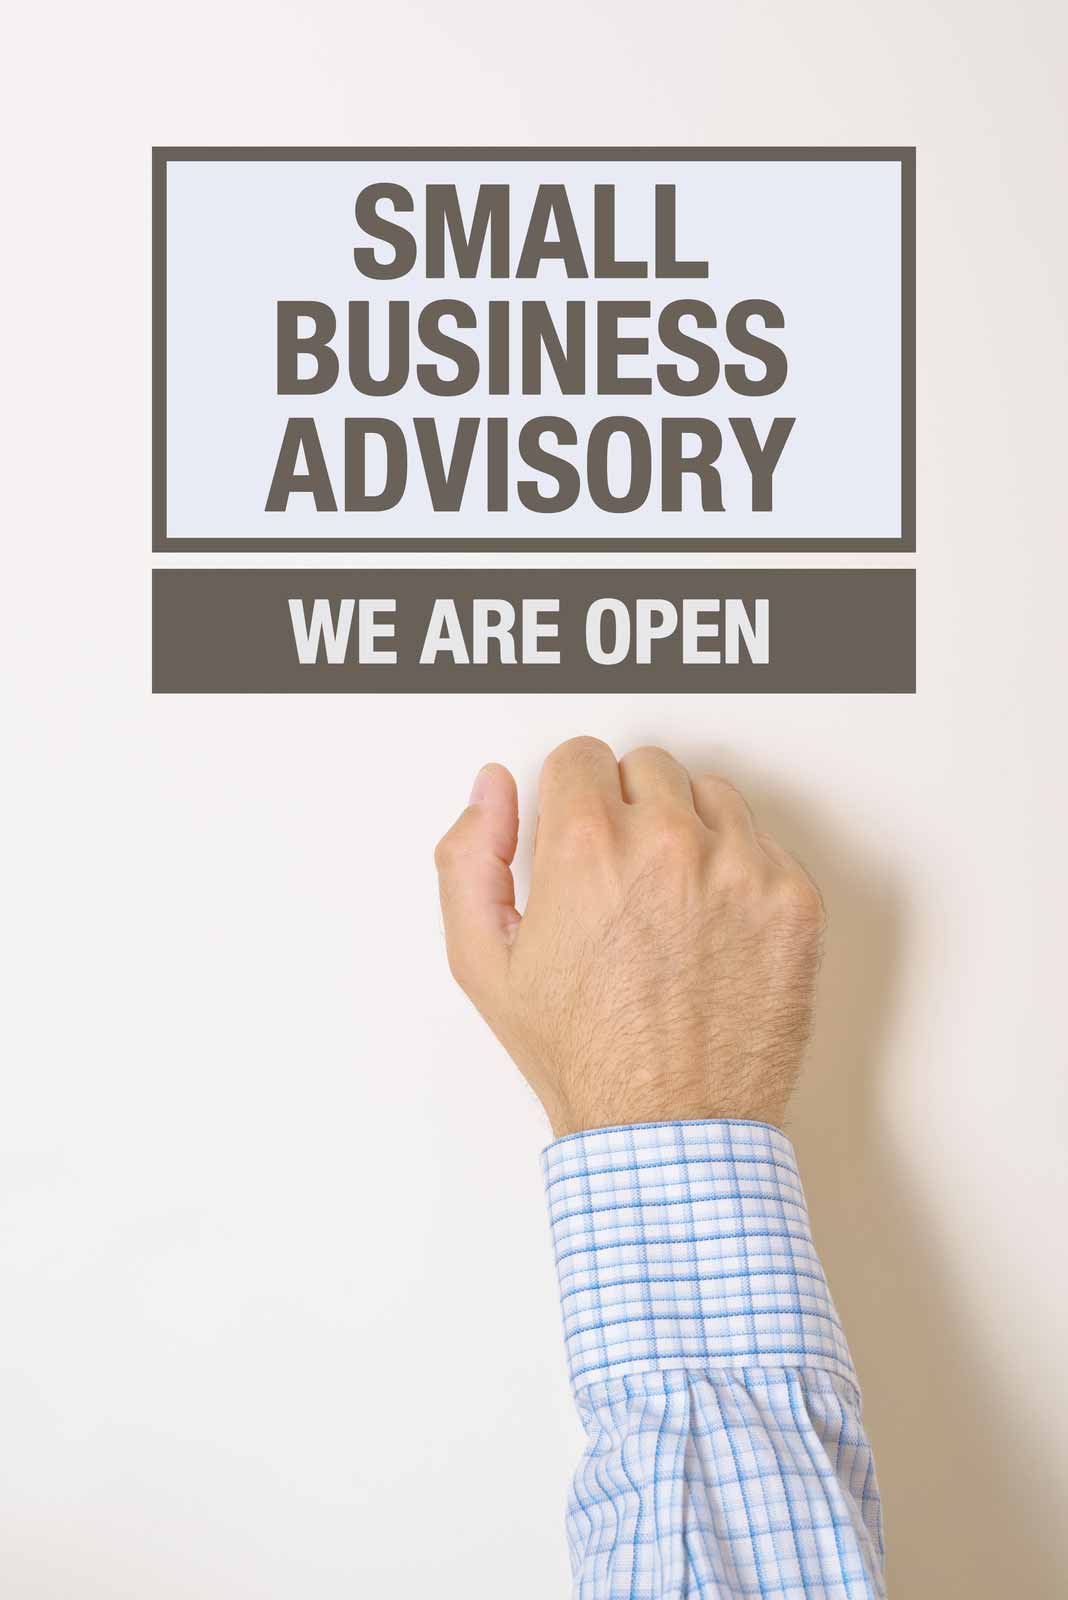 A person knocking on a door with the sign Small Business Advisory: We are Open.